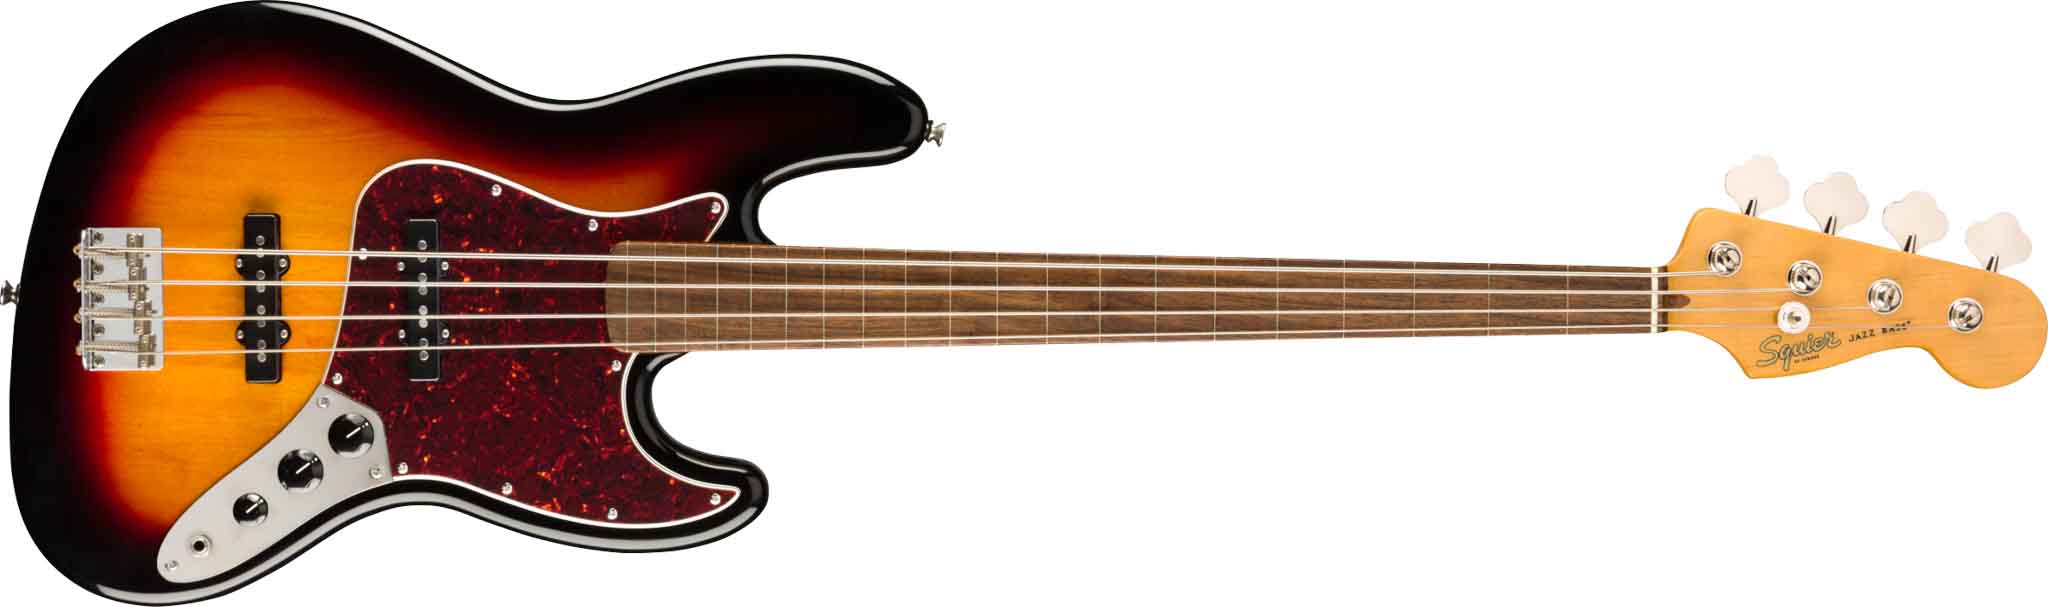 Fender Squier Classic Vibe '60s Jazz Electric Bass Fretless